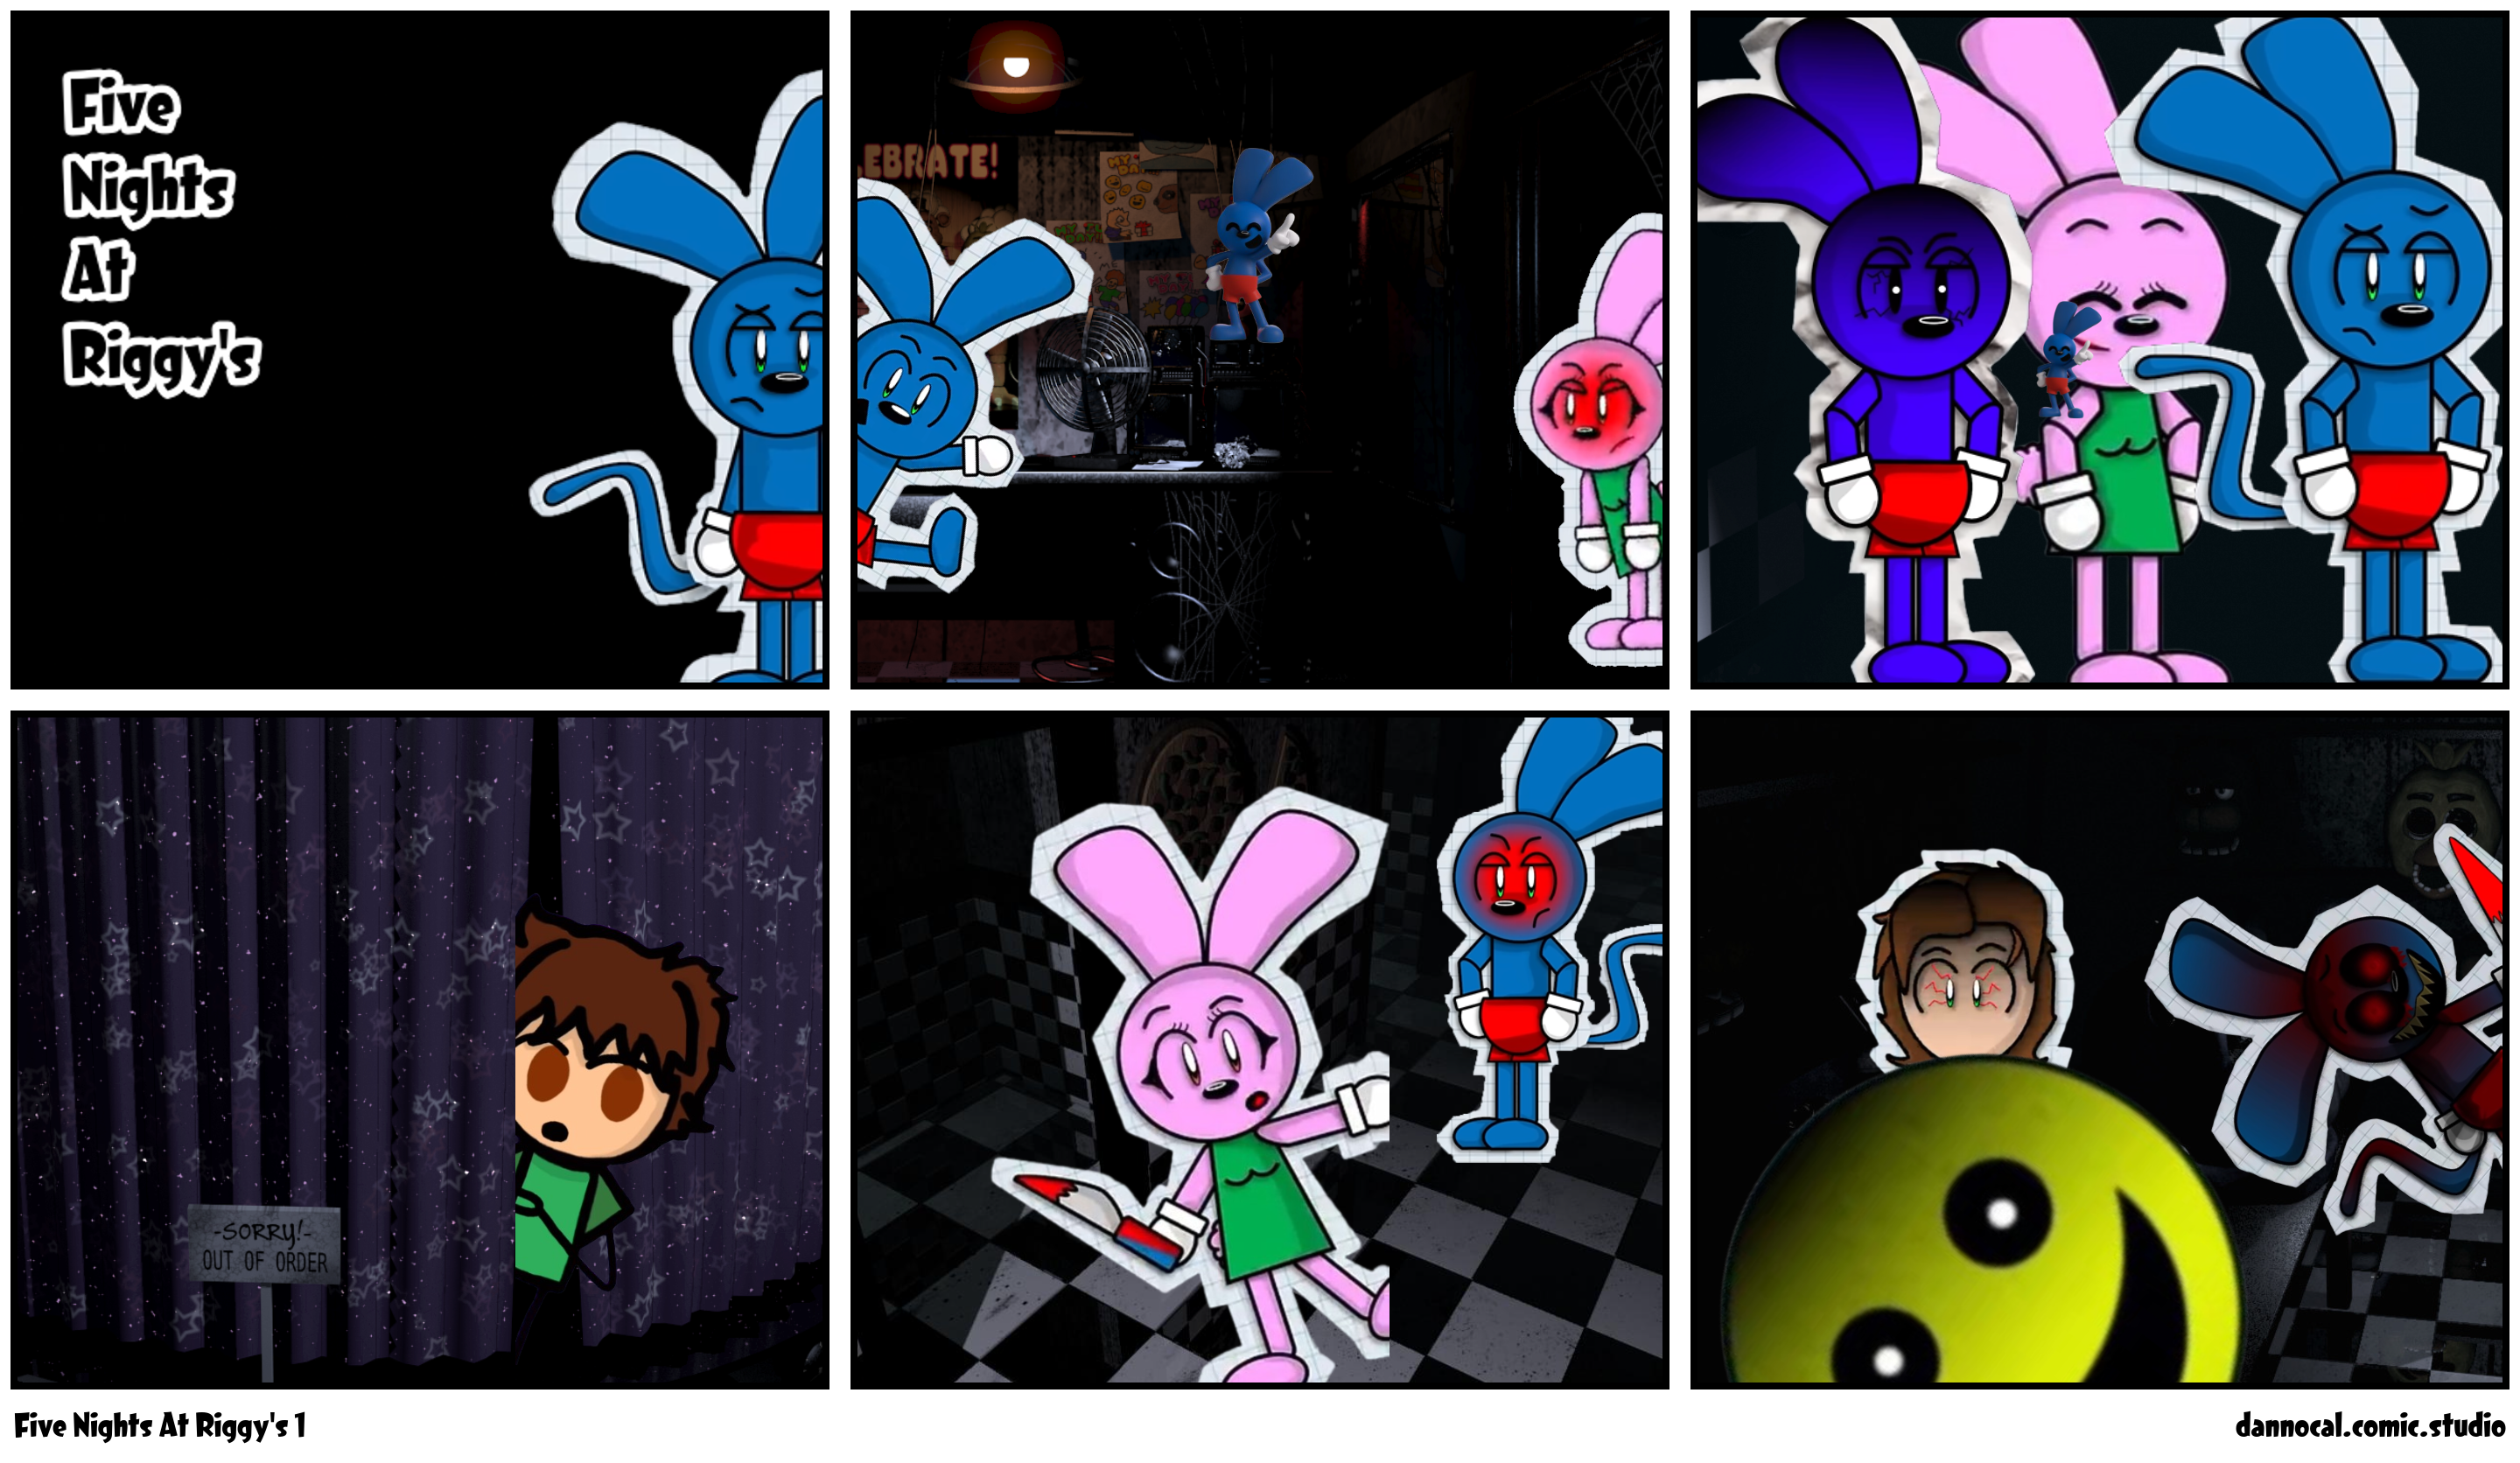 Five Nights At Riggy's 1